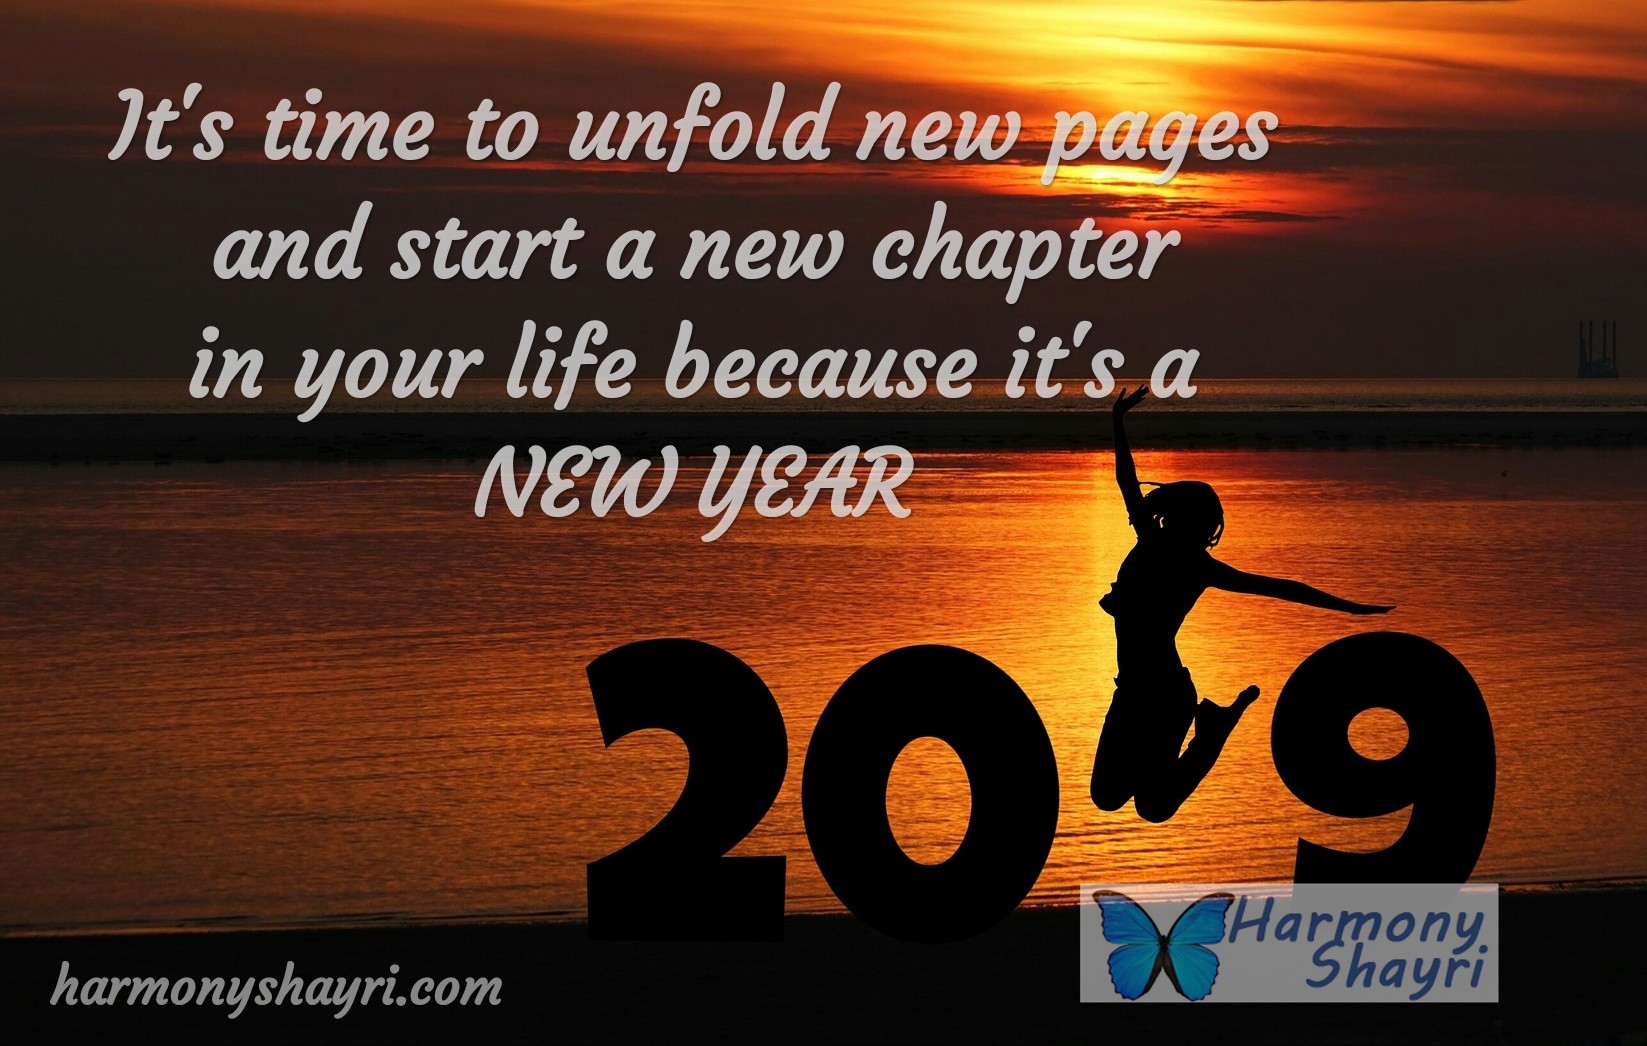 It’s time to unfold – Happy New Year